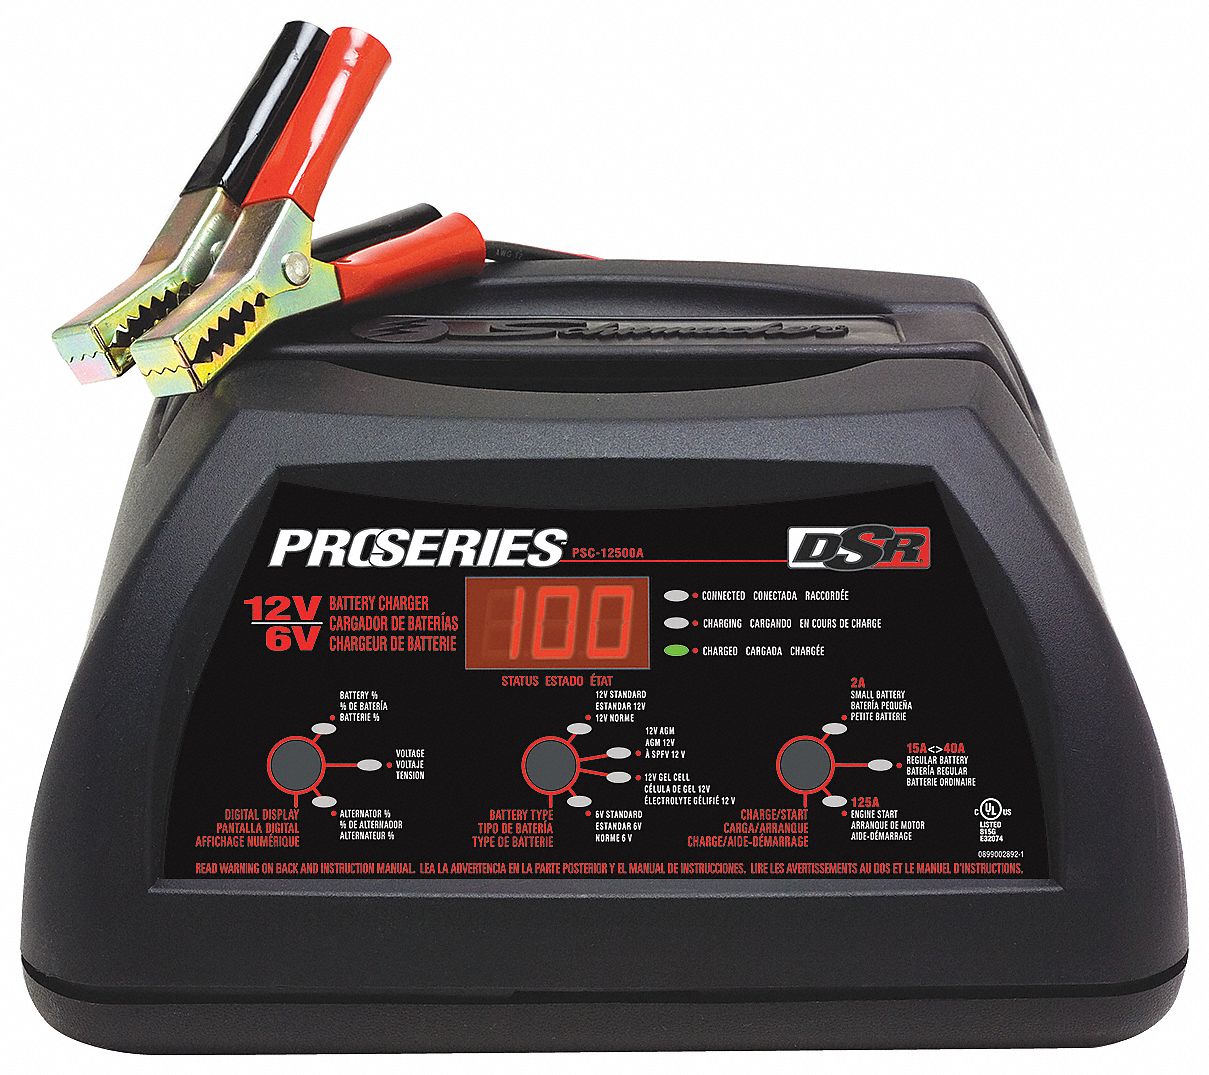 DSR PROSERIES BTRY CHARGER/STARTER,15/40 UL RATED - Automotive Battery  Chargers and Boosters - WWG5KGZ6 | 5KGZ6 - Grainger, Canada